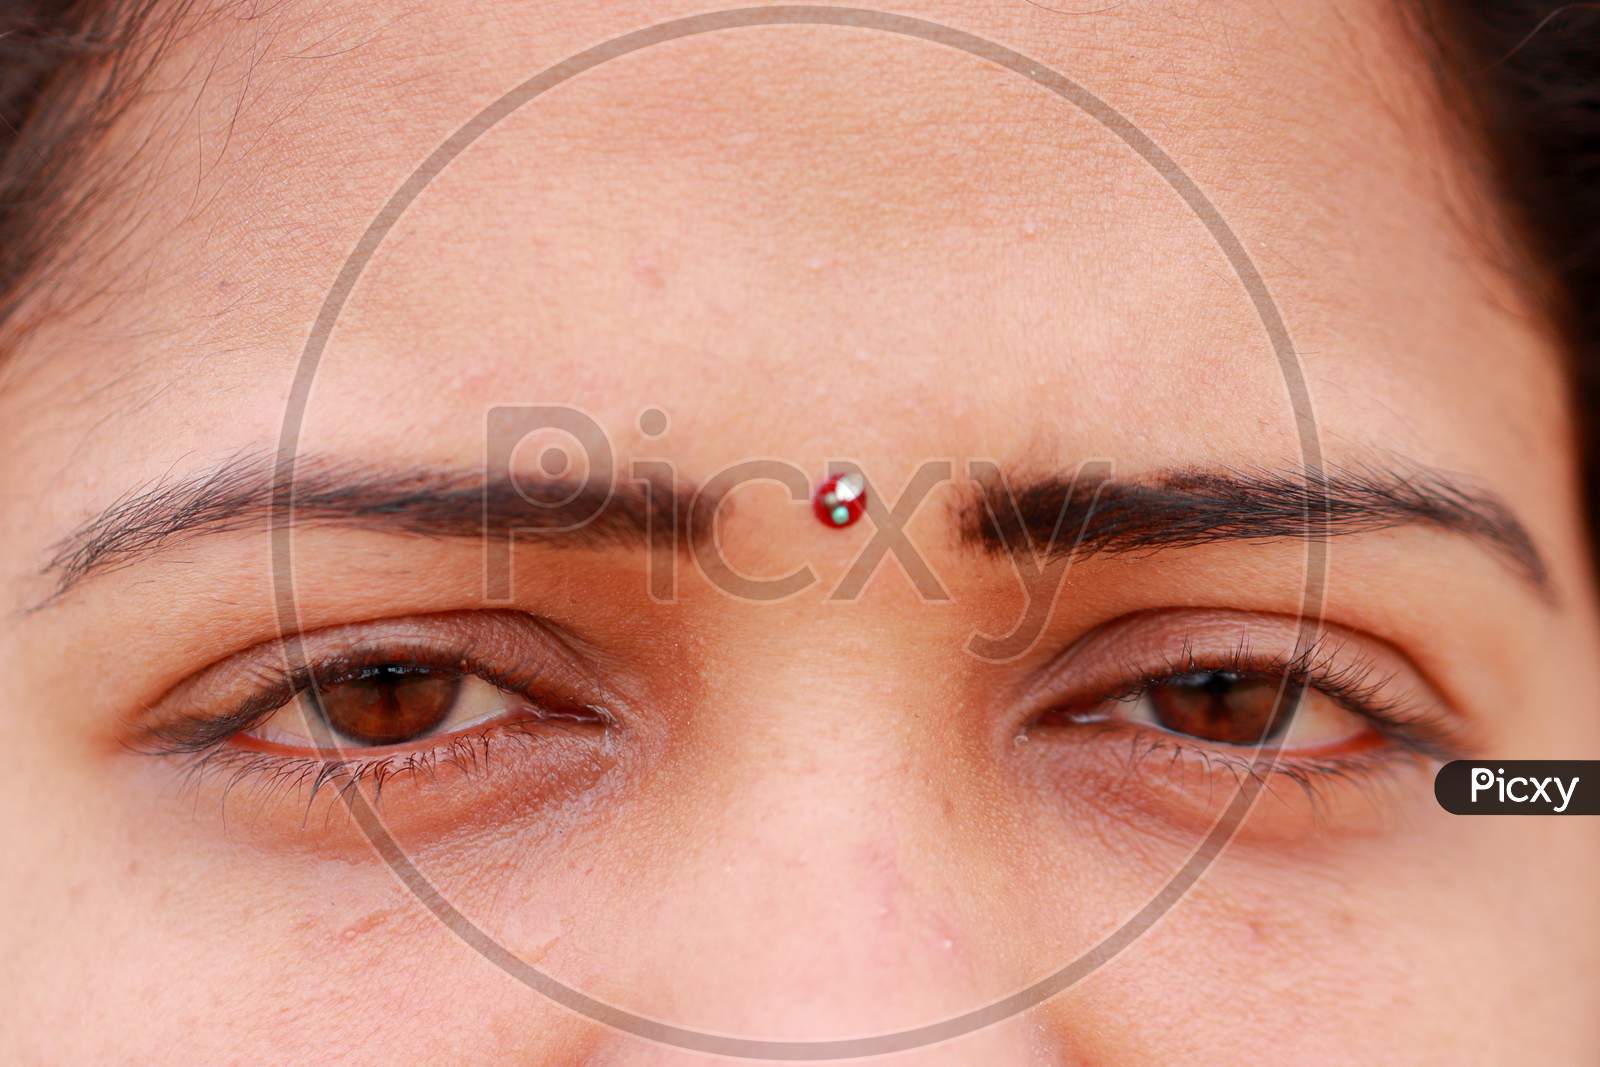 The Tears Of Tears Flow From The Cute Eyes Of The South Indian Lady Model.